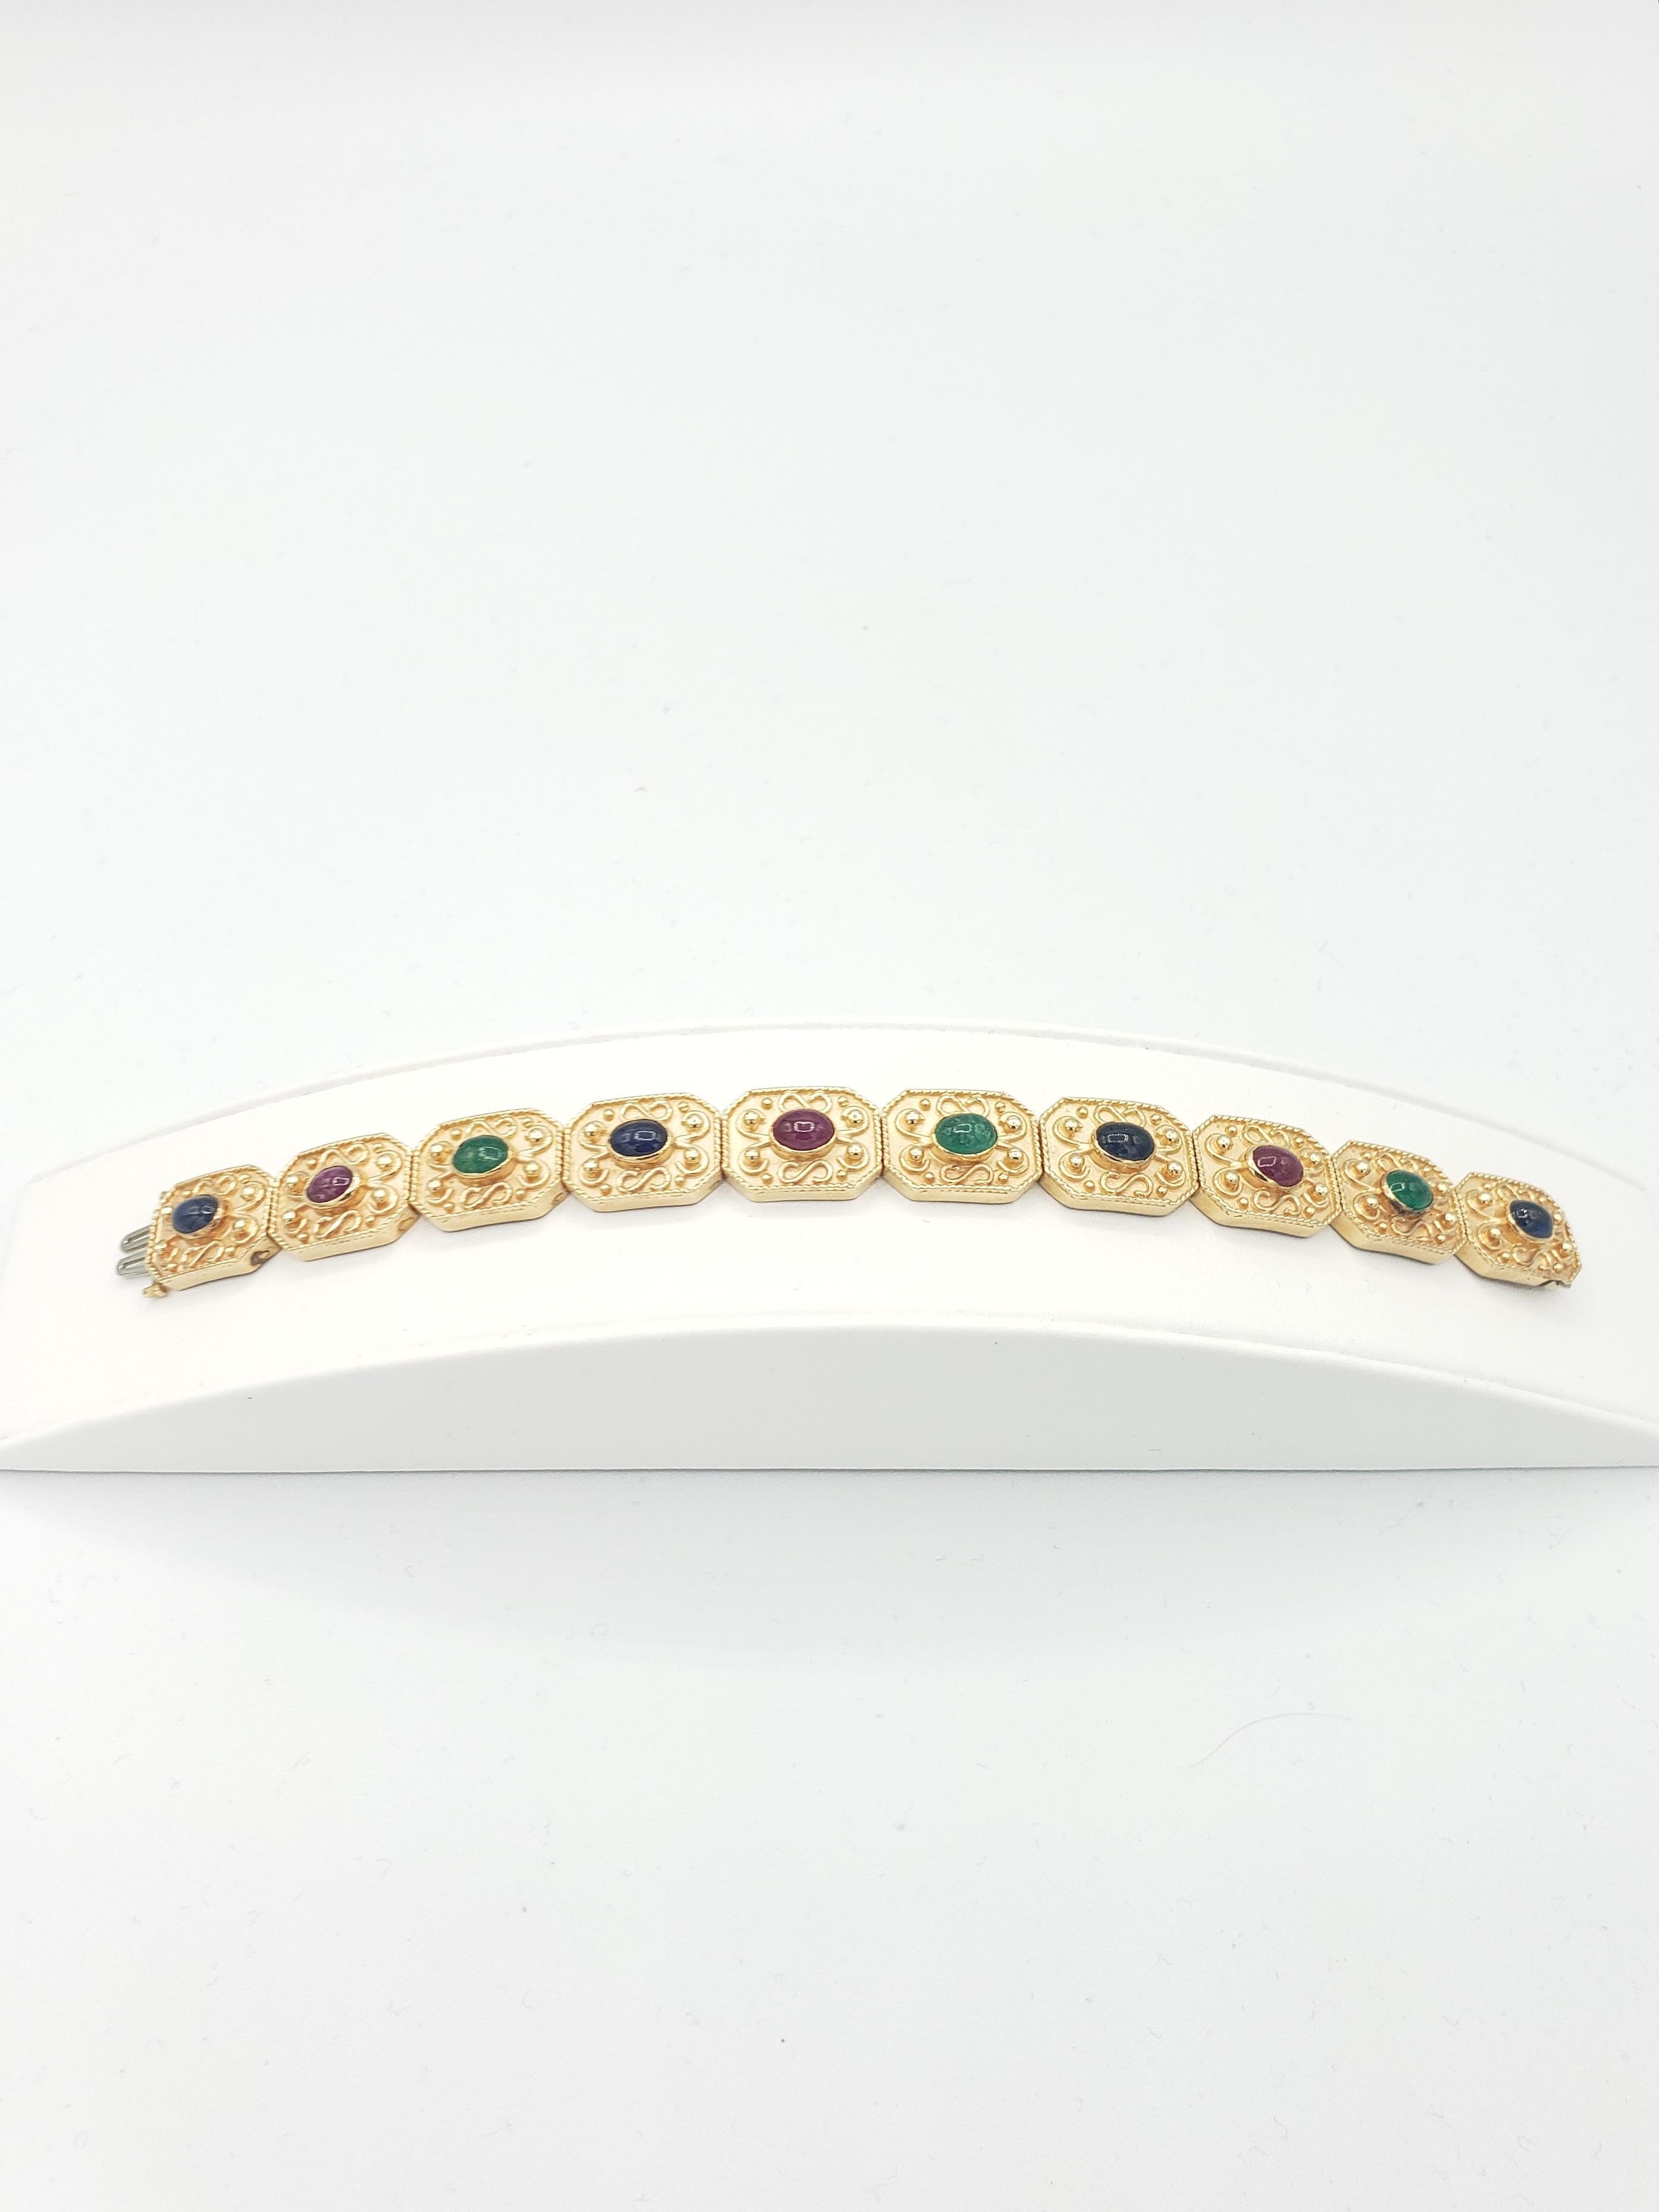 Oval Cut NEW Natural Ruby, Sapphire, Emerald Byzantine Bracelet in 14k Solid Yellow Gold For Sale